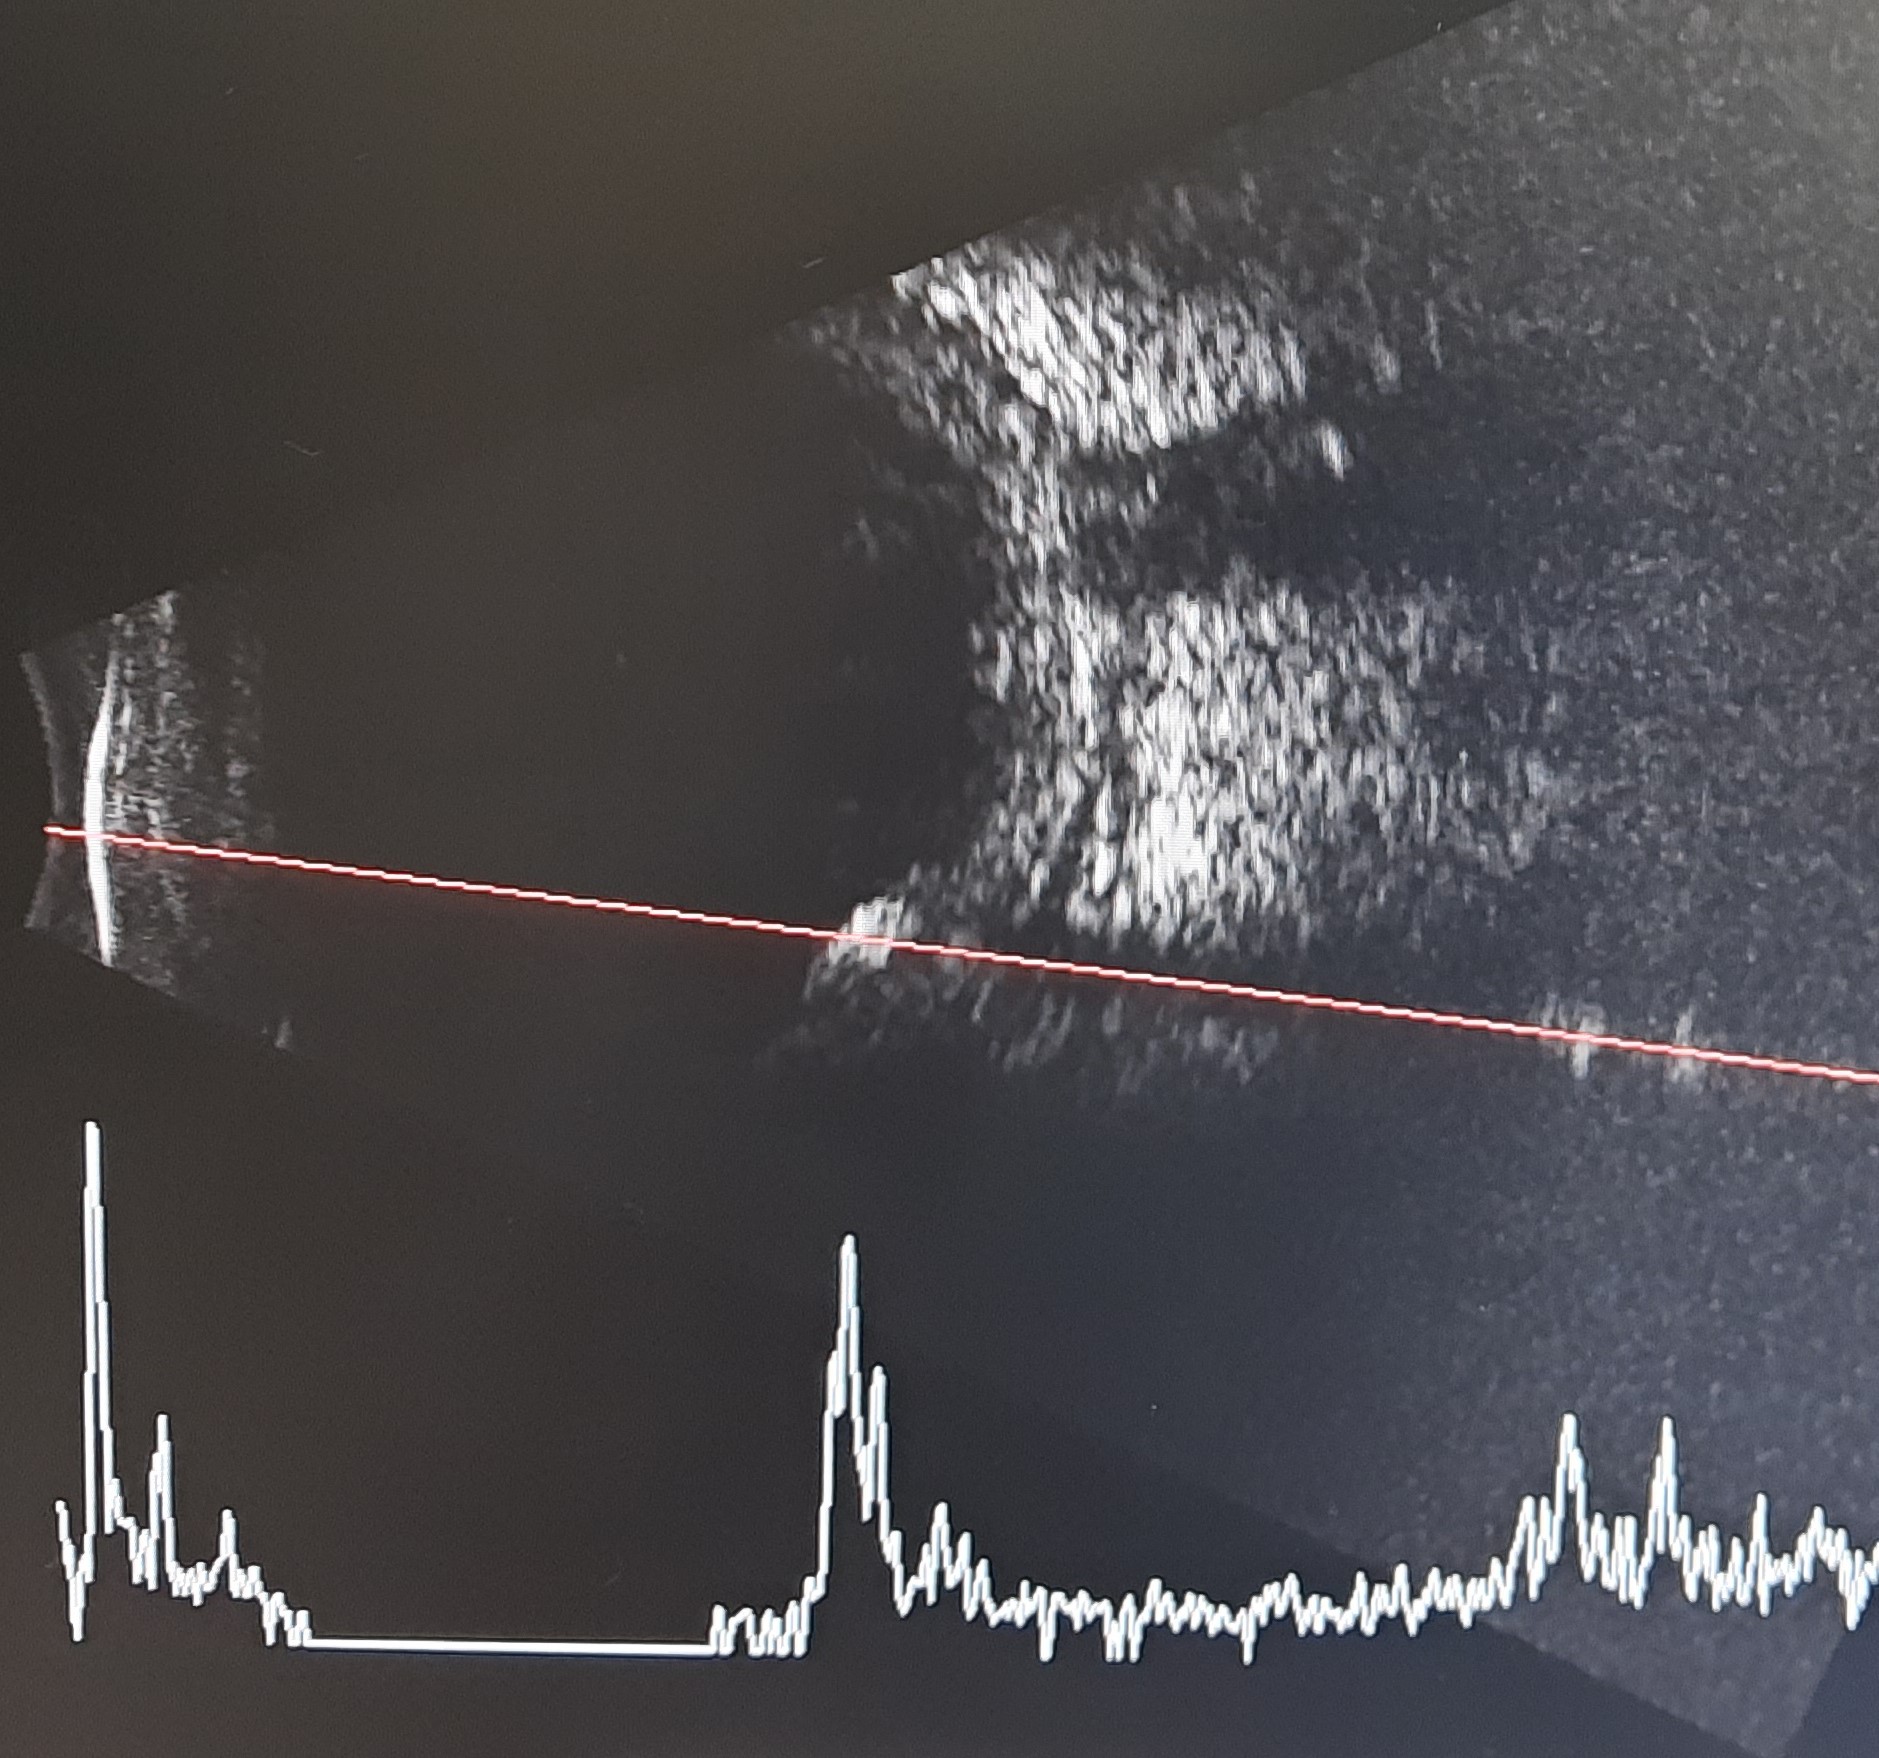 Ultrasound B scan of same foreign body at low gain. The hyperechoicity is persisting at low gain with high spike on A scan.